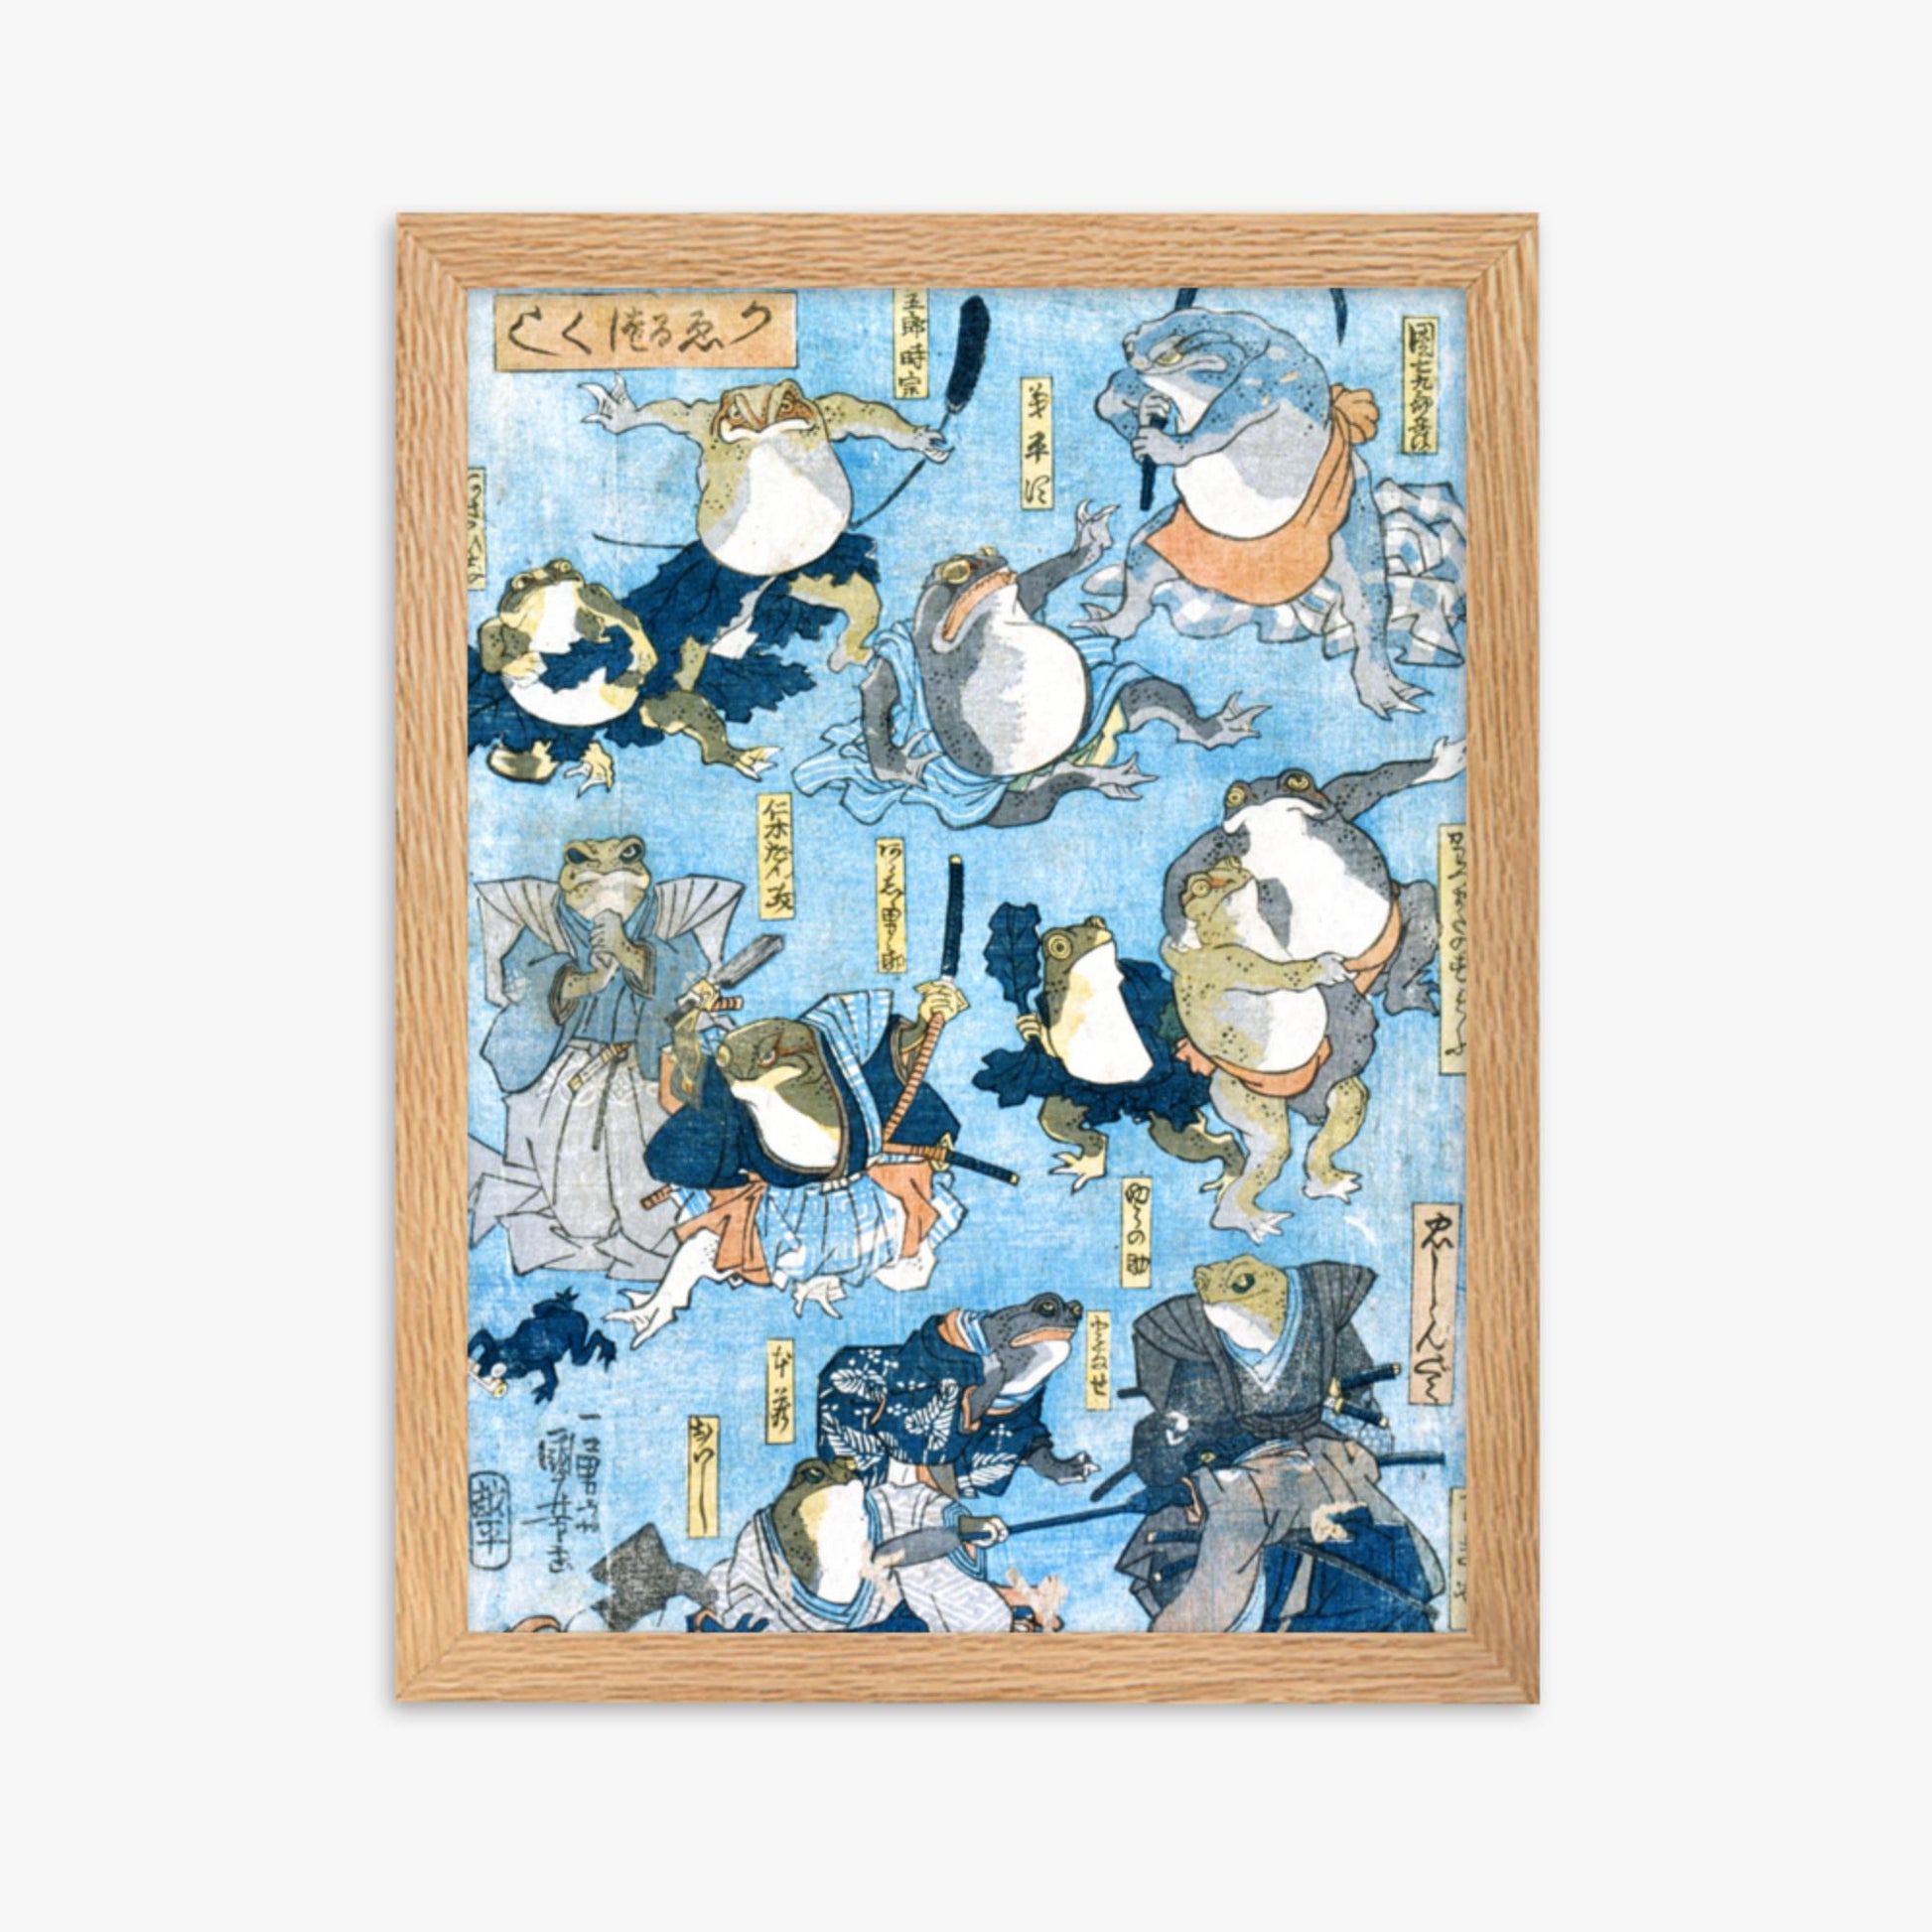 Utagawa Kuniyoshi - Famous Heroes of the Kabuki Stage Played by Frogs  30x40 cm Poster With Oak Frame